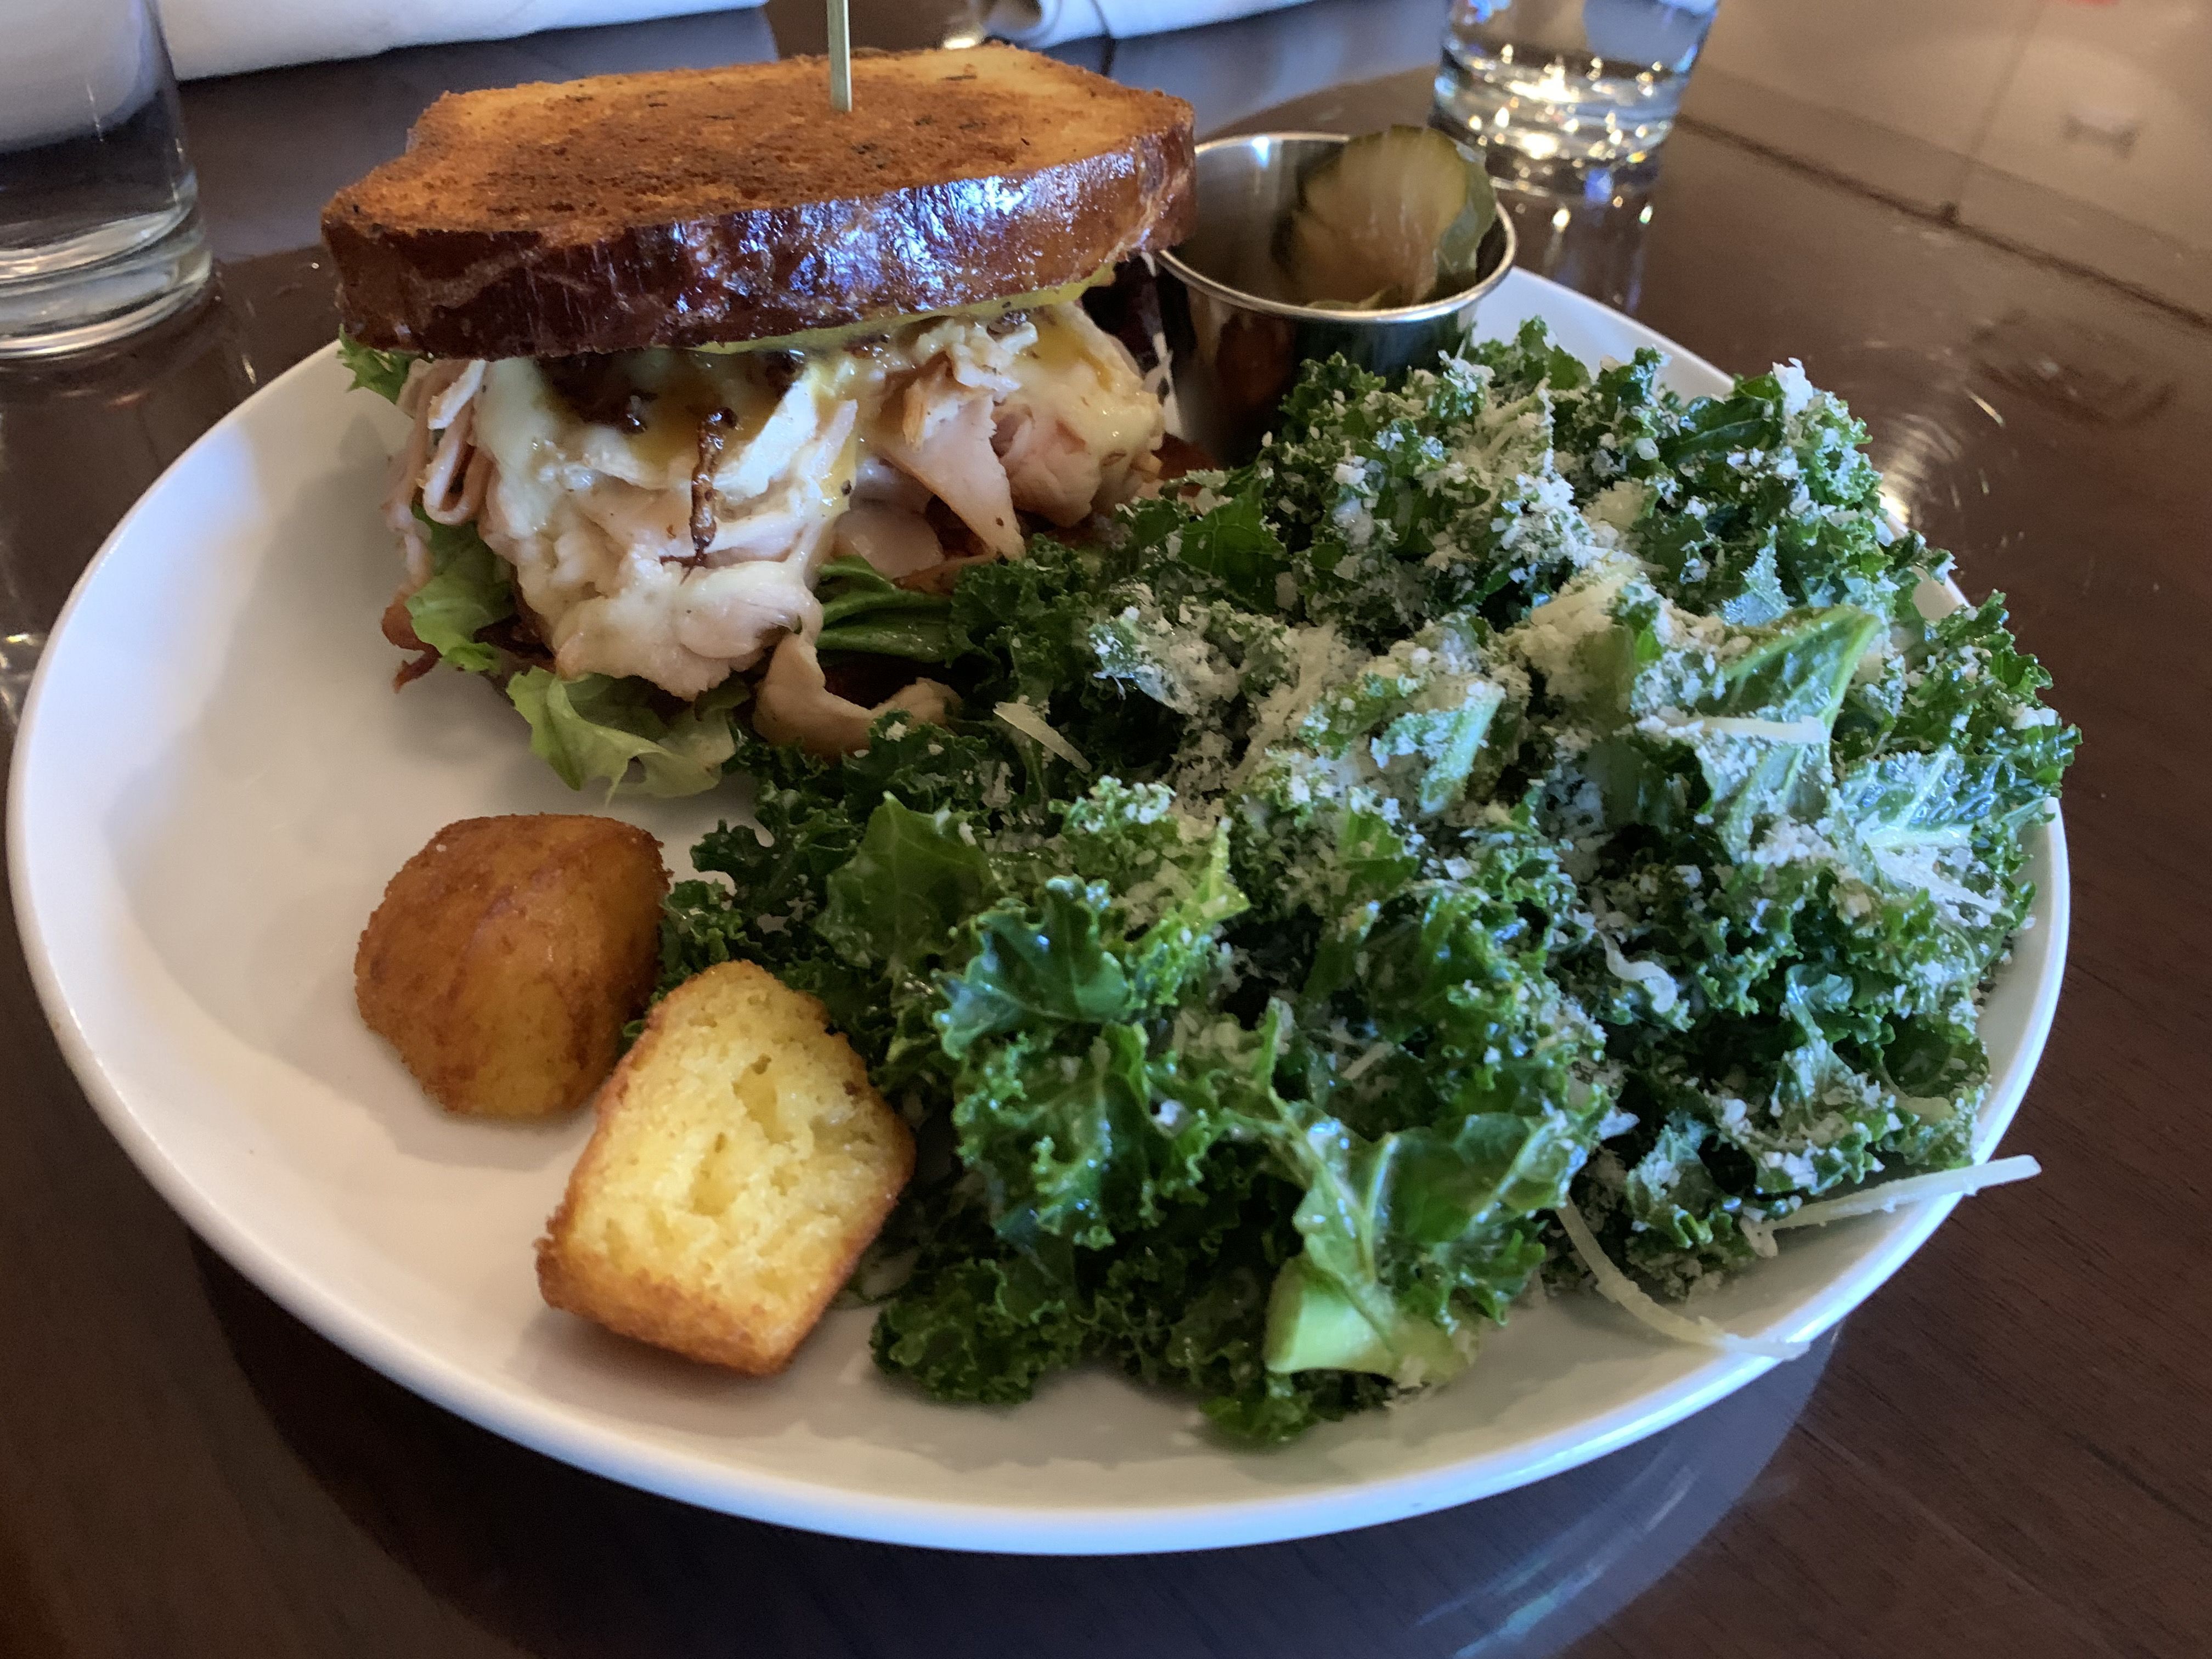 A plate with a sandwich, cornbread bites and salad